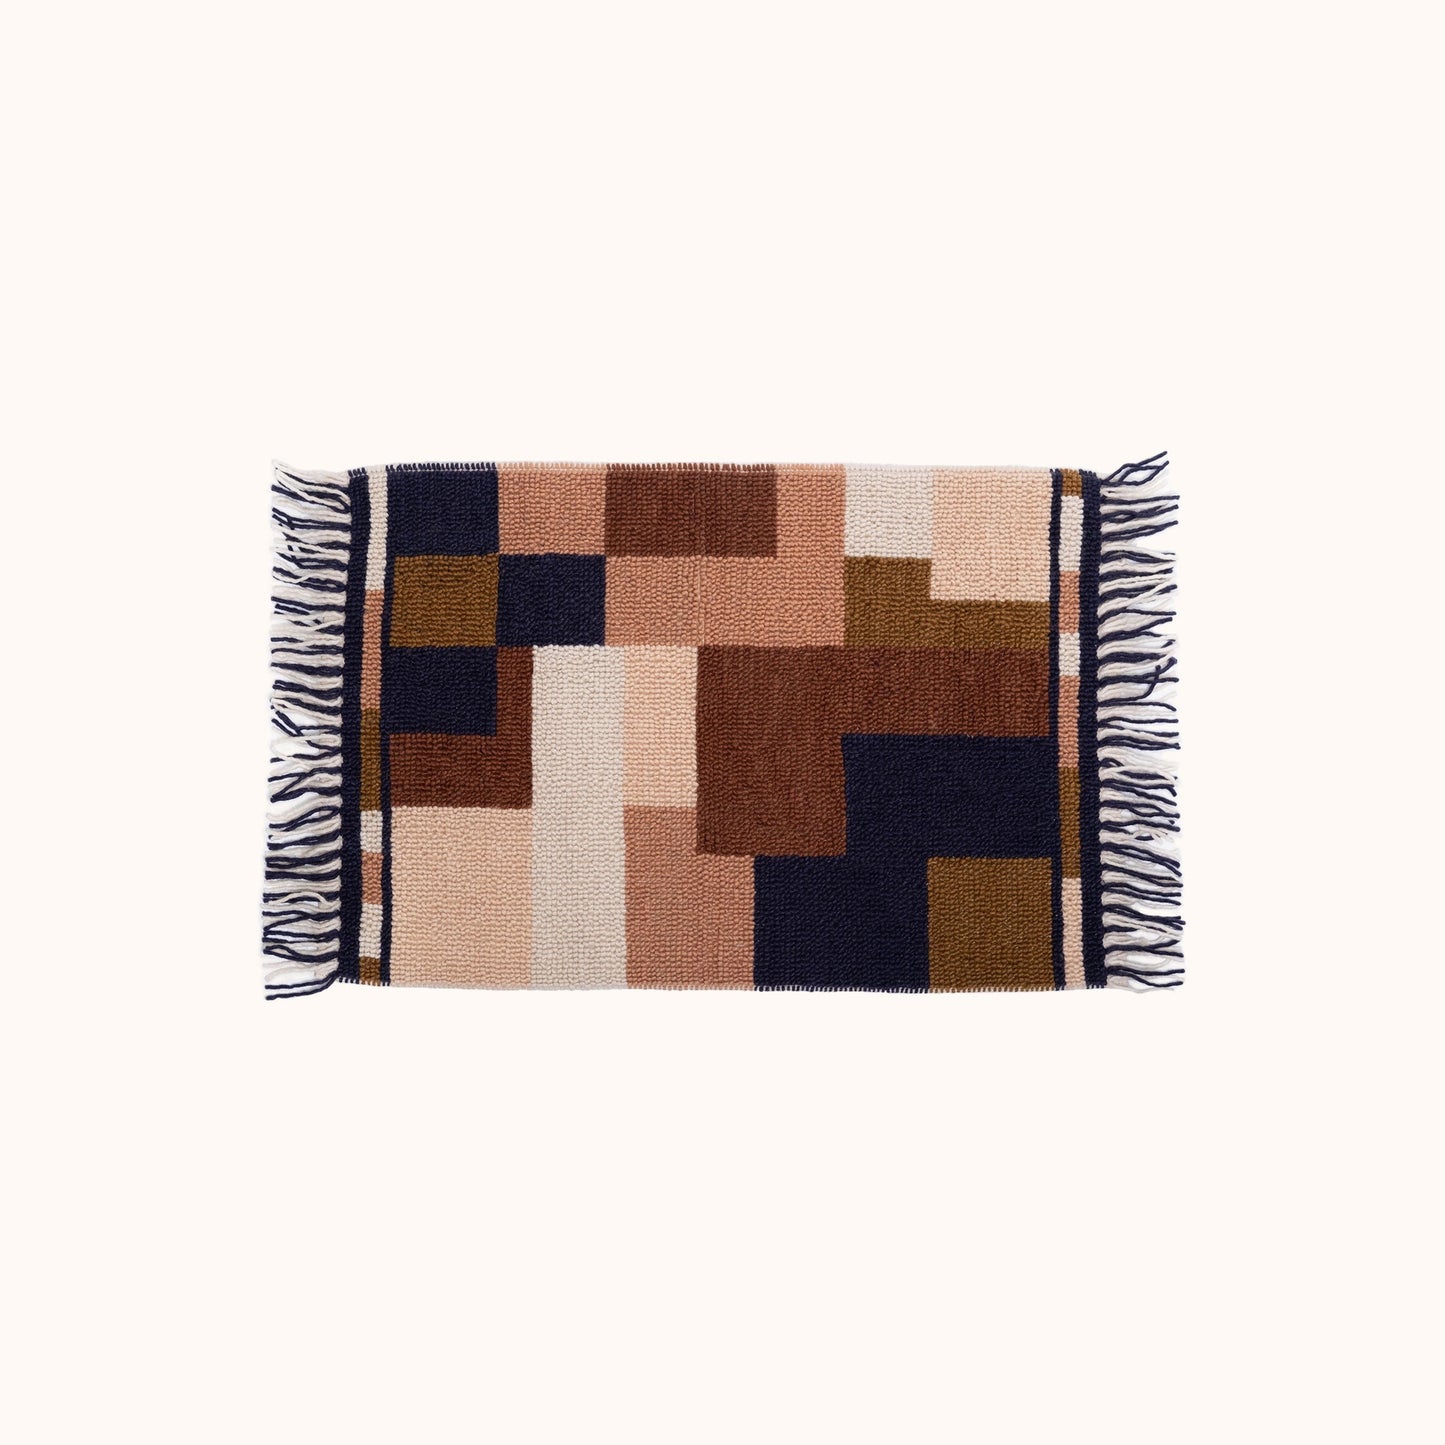 The Oda Rug features a geometric design in a mix of warm earth tones, rich navy, and soft cream. This hand woven, vintage inspired rug is an easy way to add pattern and color to any space. Ethically produced and hand woven in India.